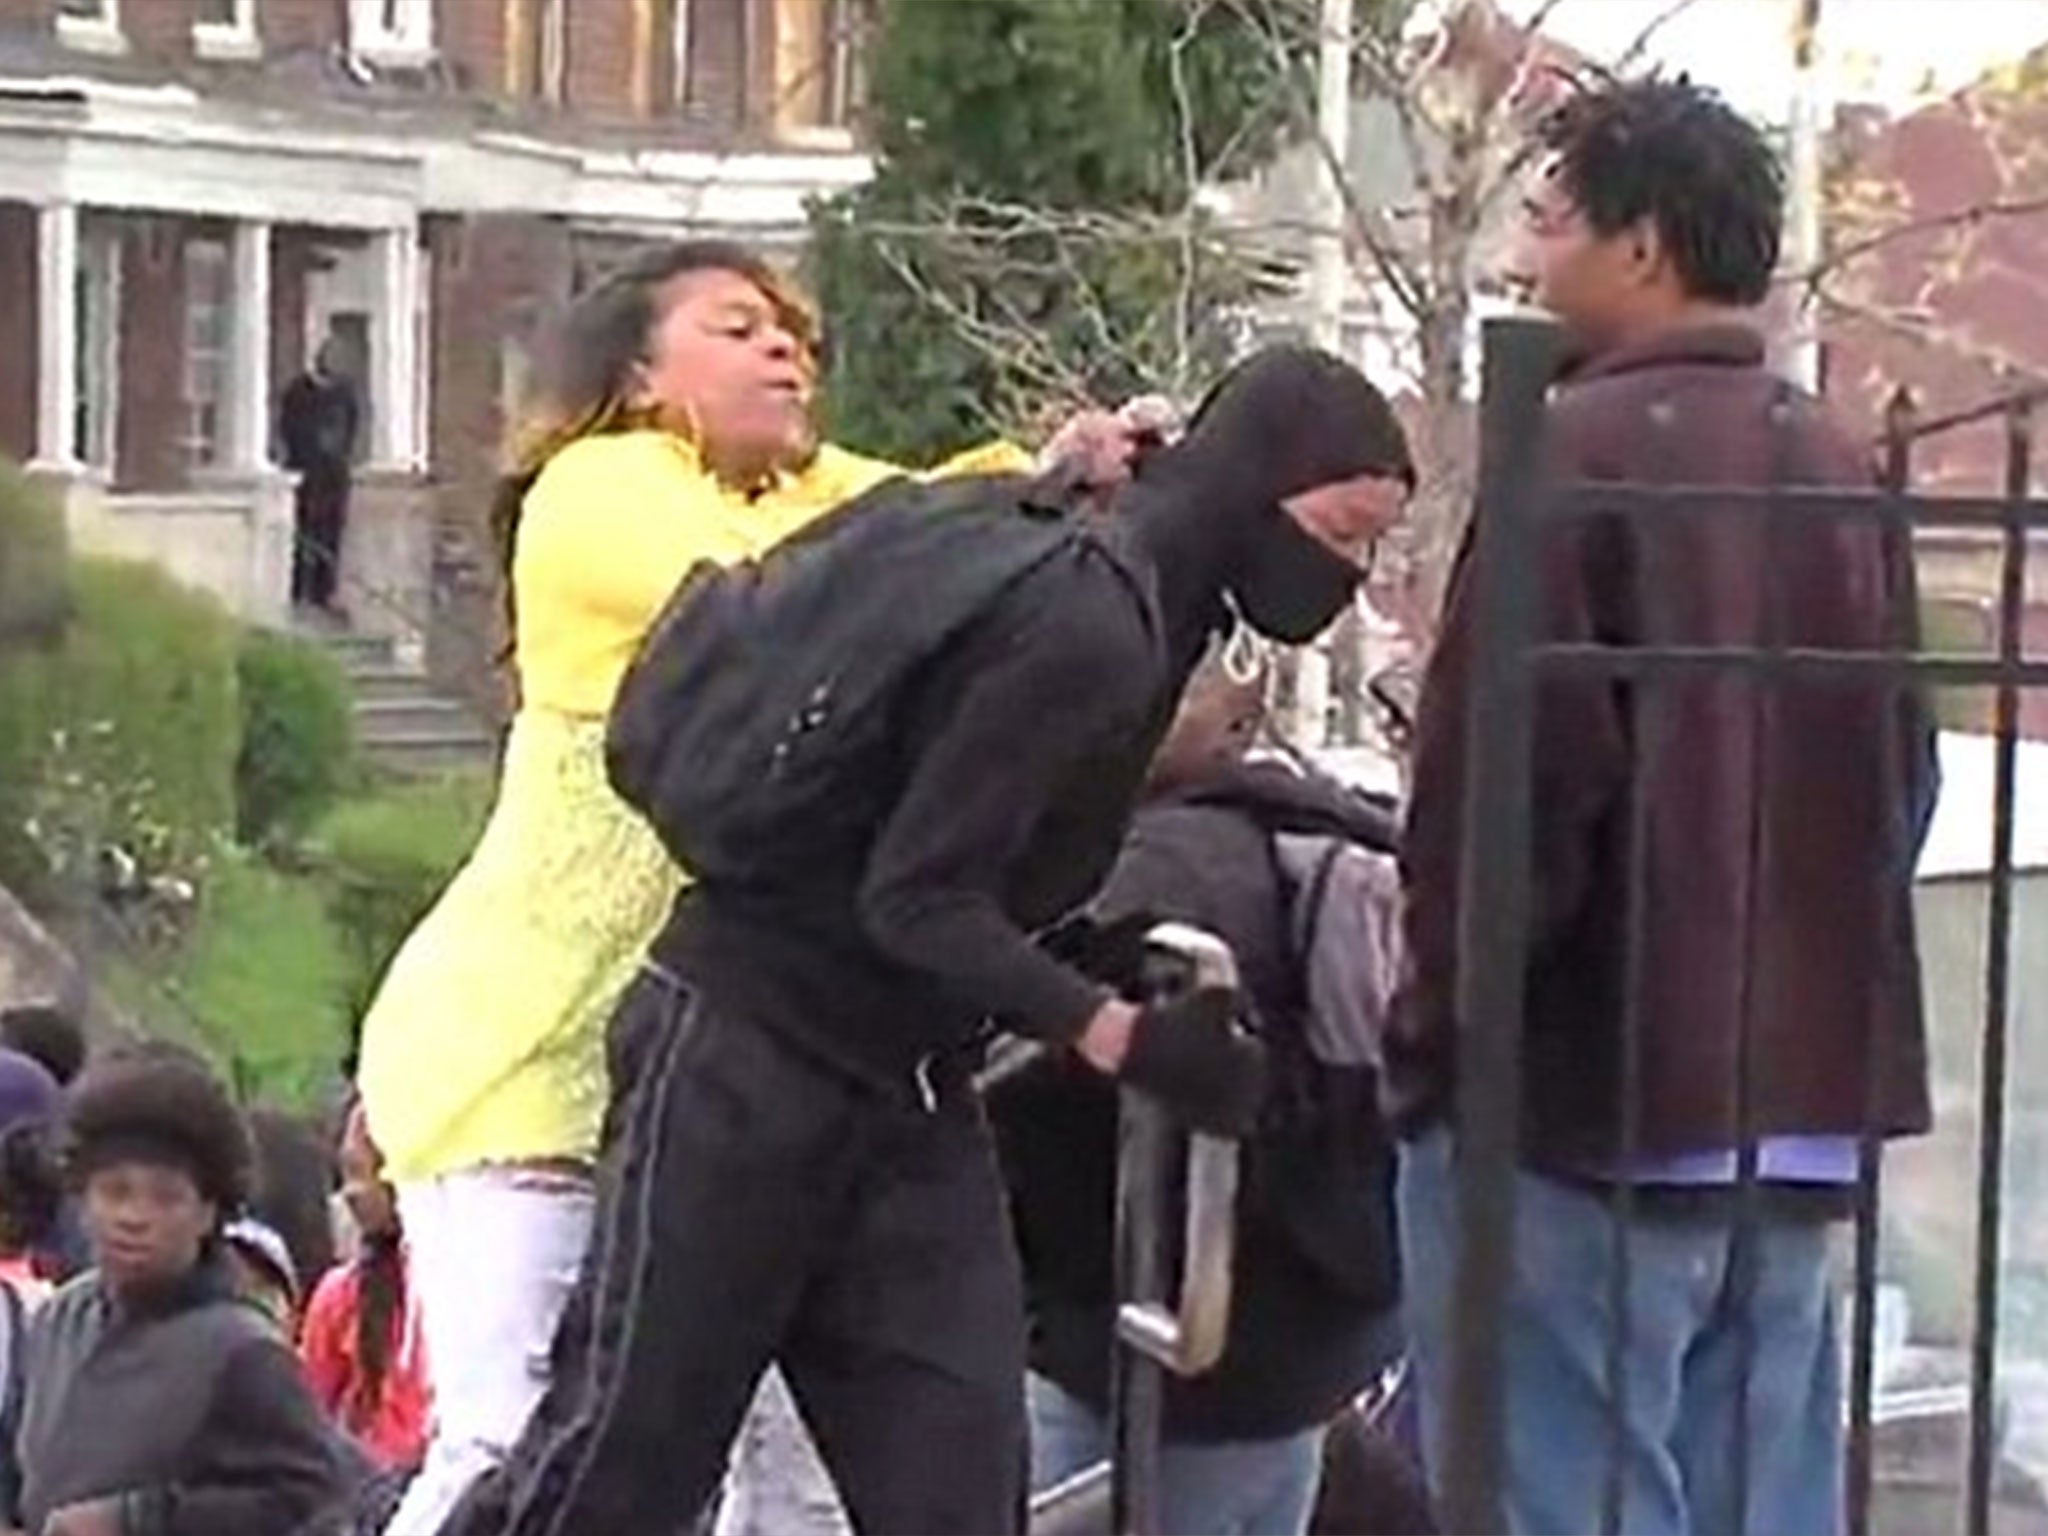 A woman reprimands a young man believed to be her son for allegedly attempting to take part in the riots